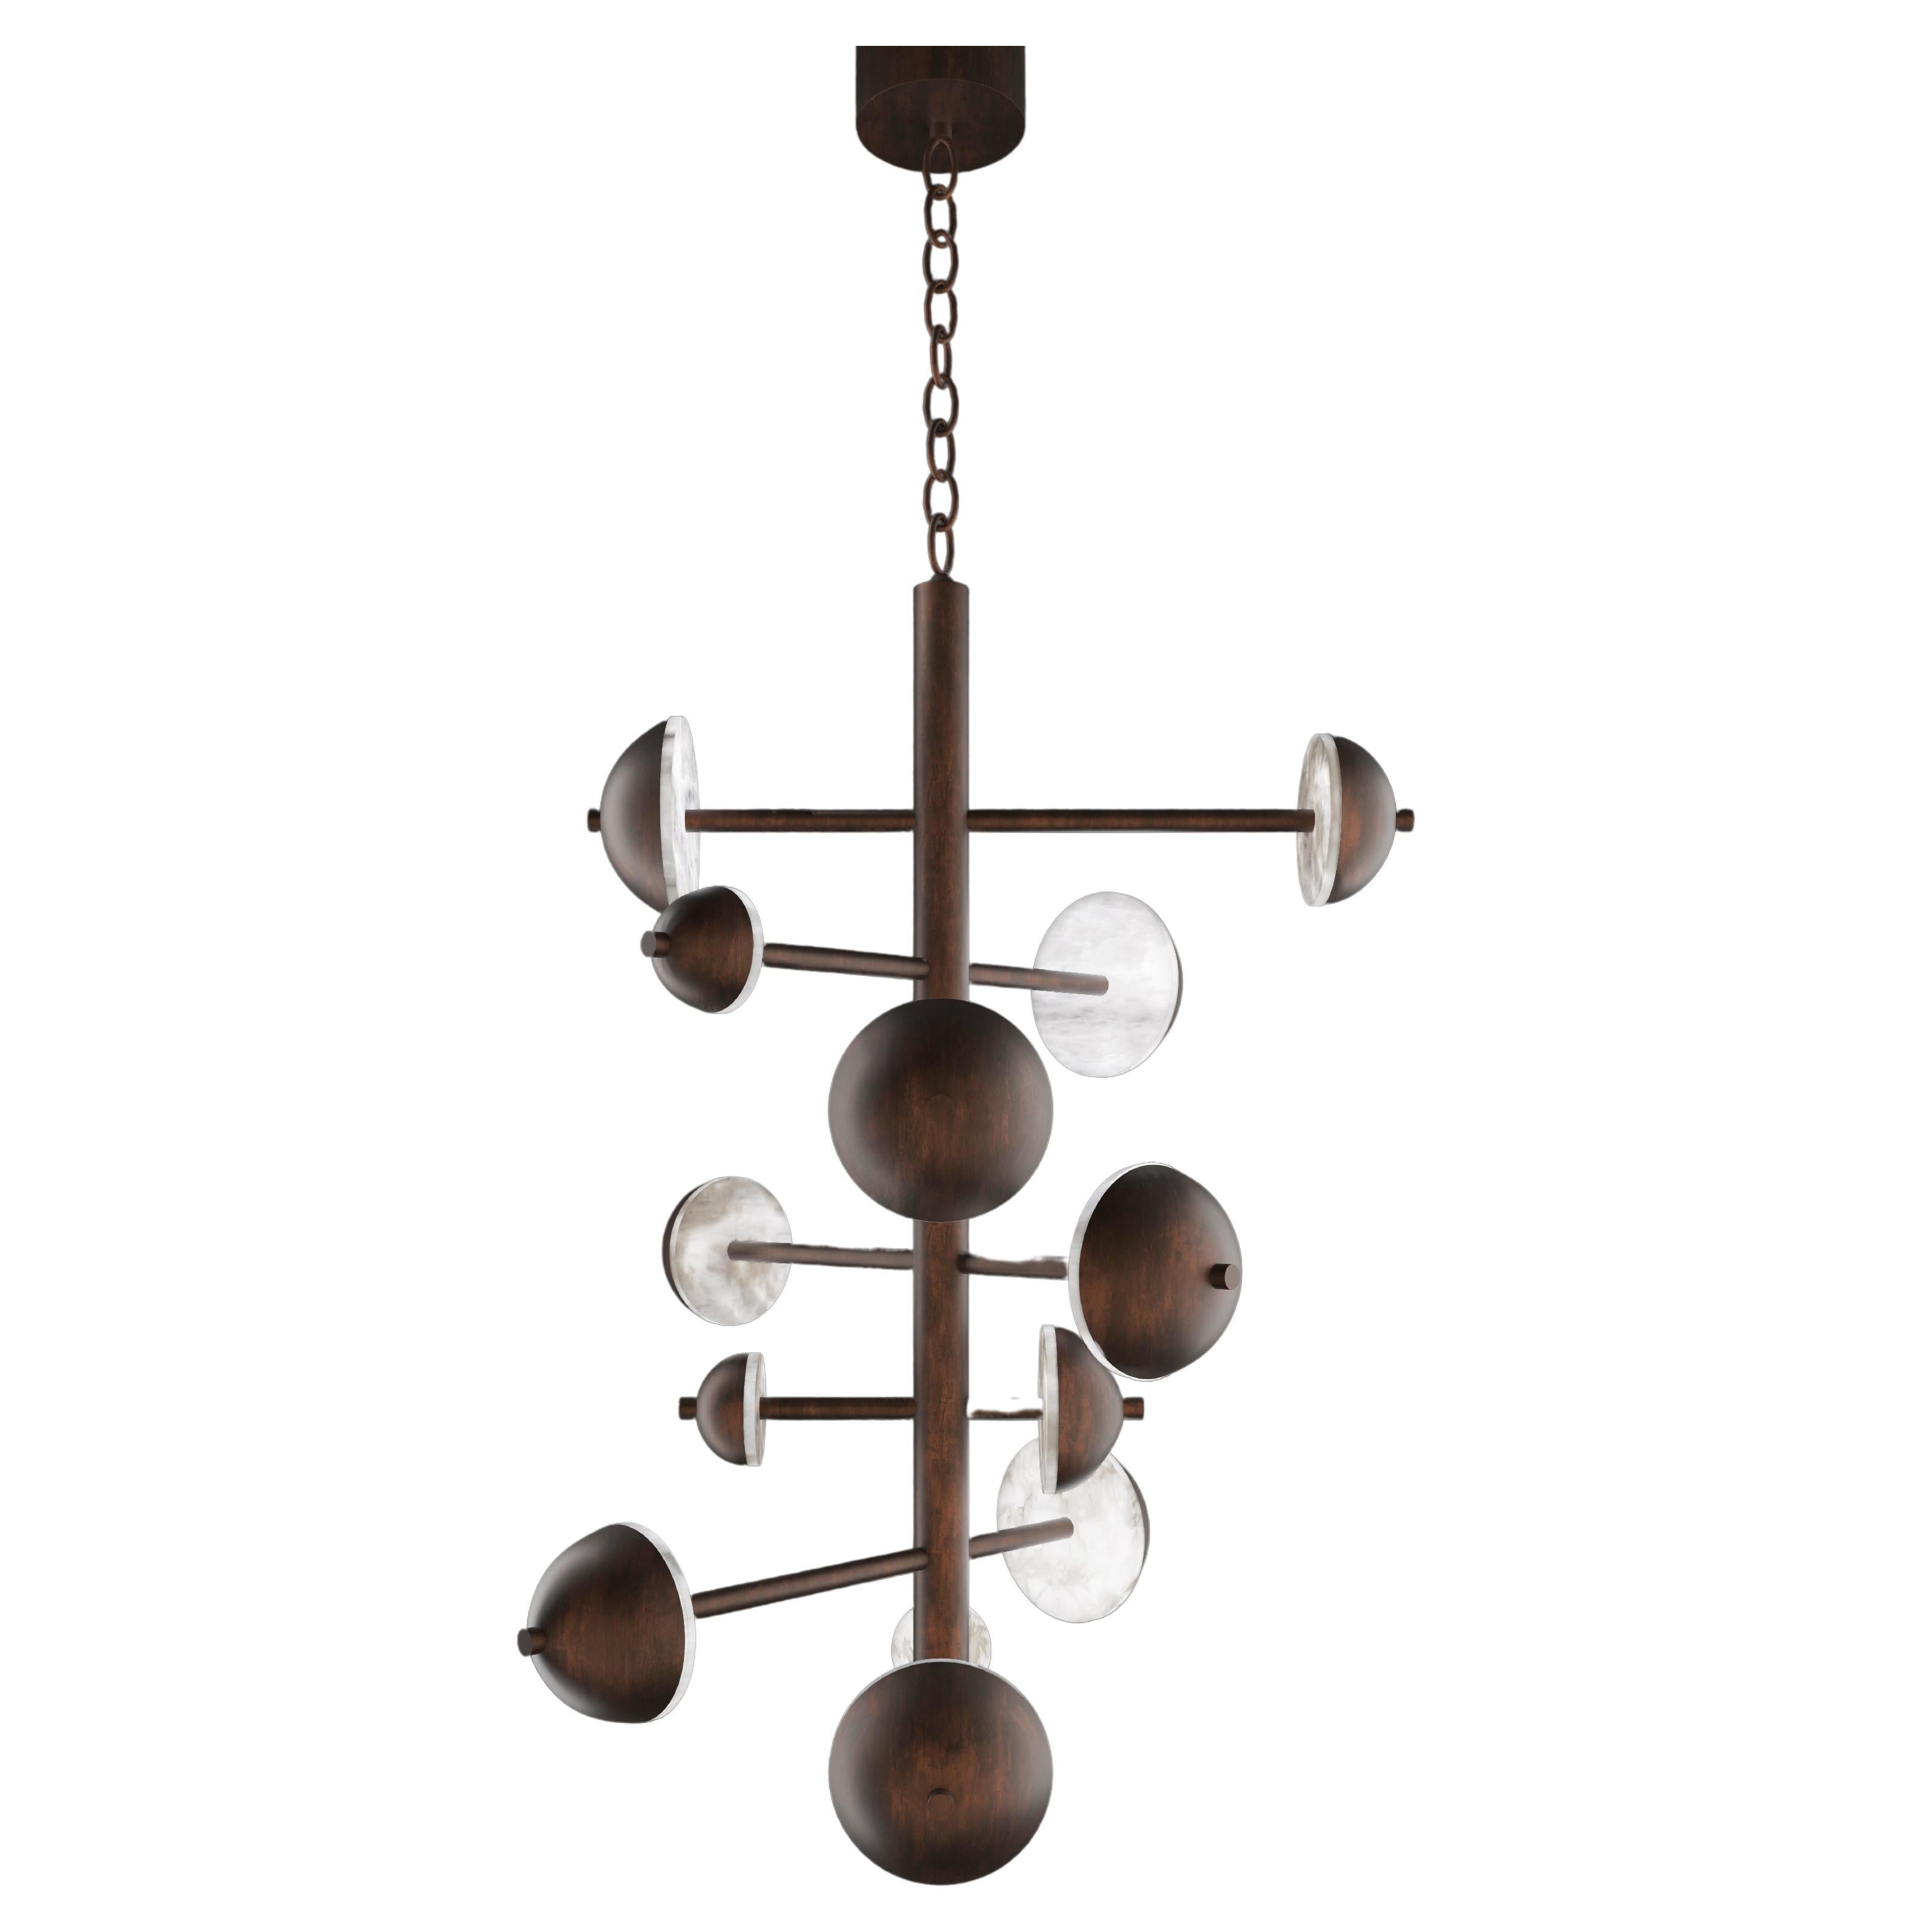 Ares Ruggine Of Florence Metal Chandelier by Alabastro Italiano For Sale